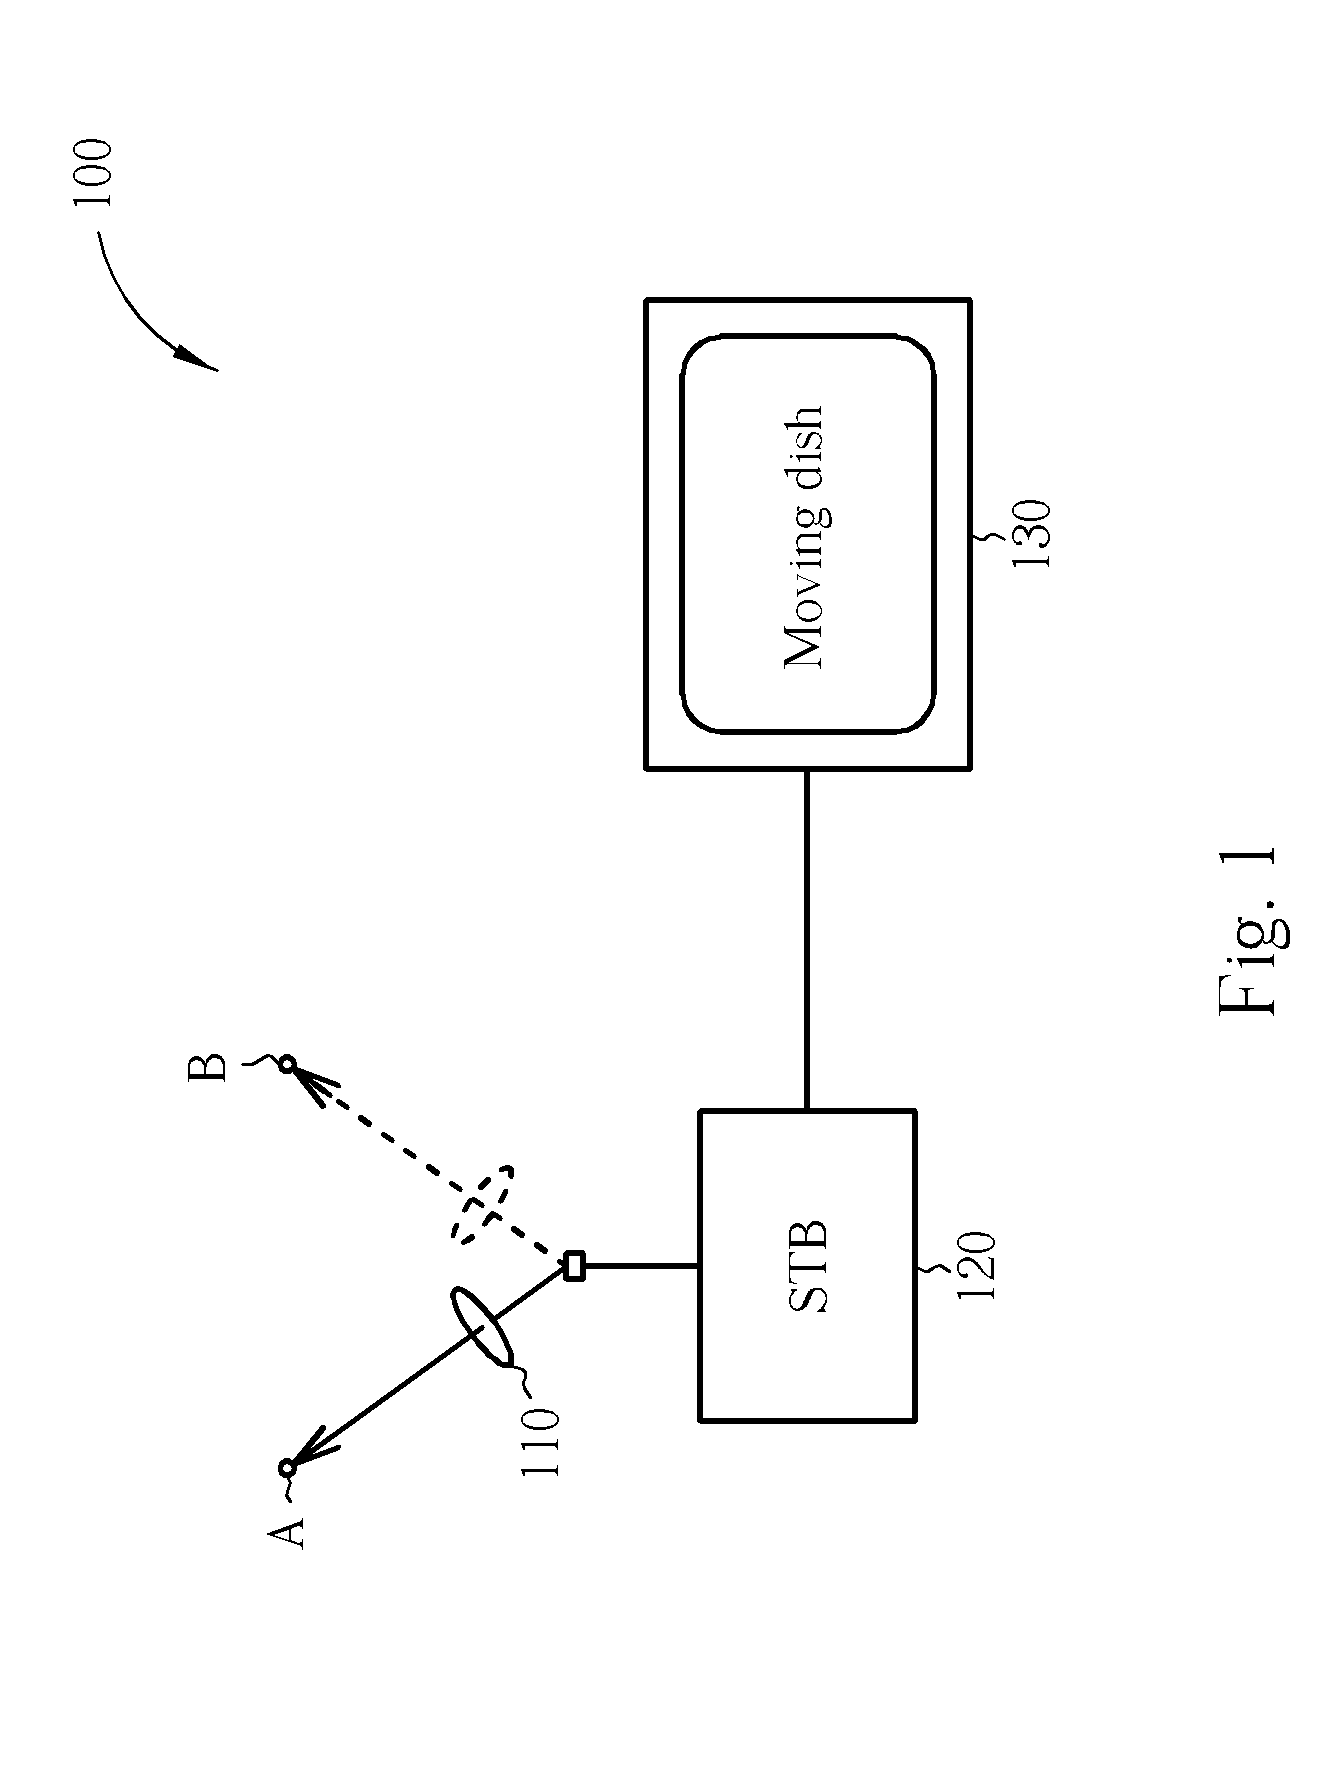 Display method for a dish of a DVB-S system